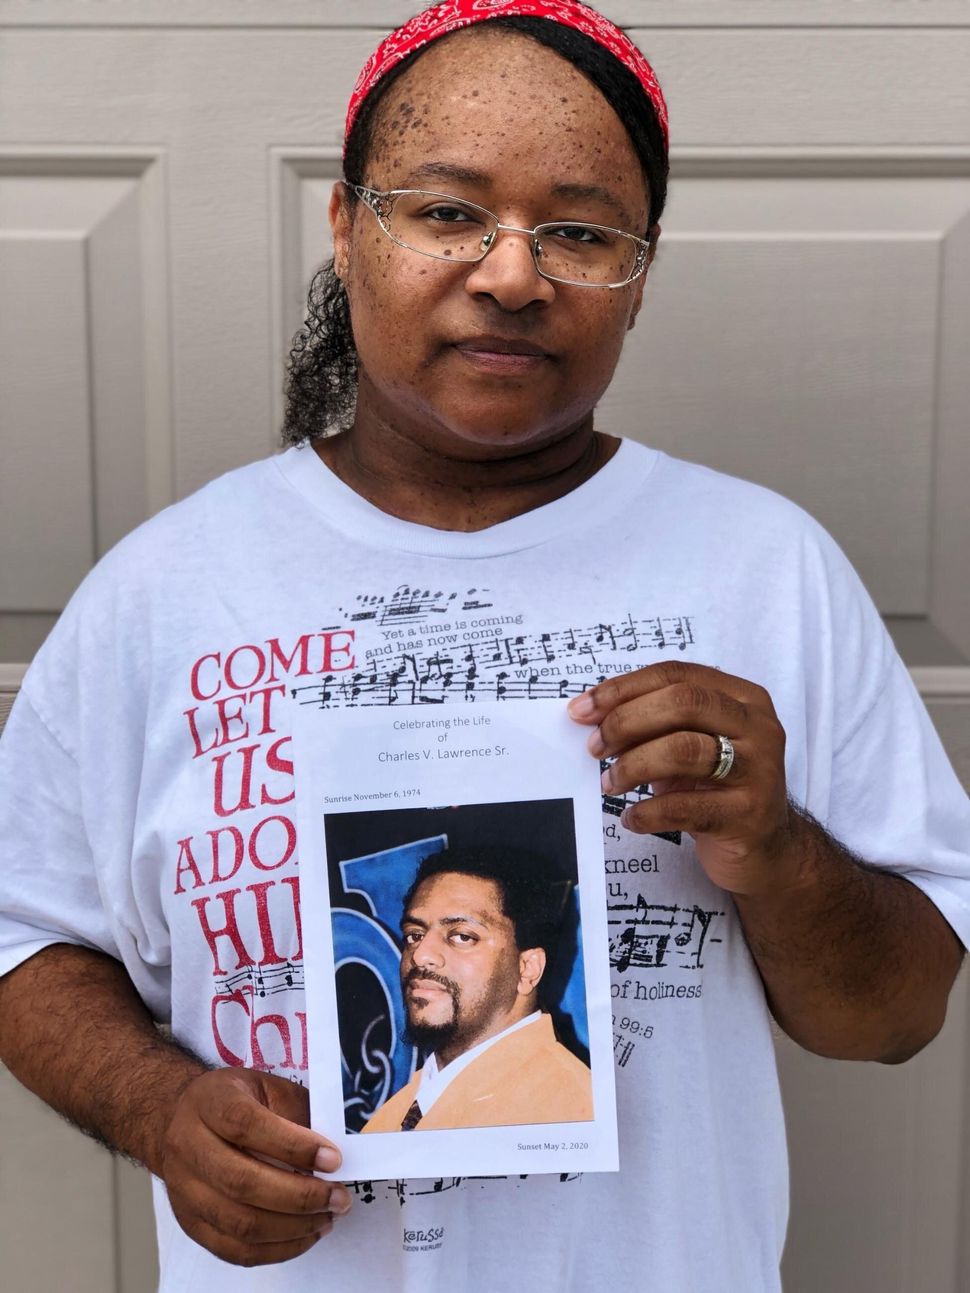 Sanya Lawrence holds a photo of her husband, Charles Lawrence, who died from the coronavirus in May 2020.